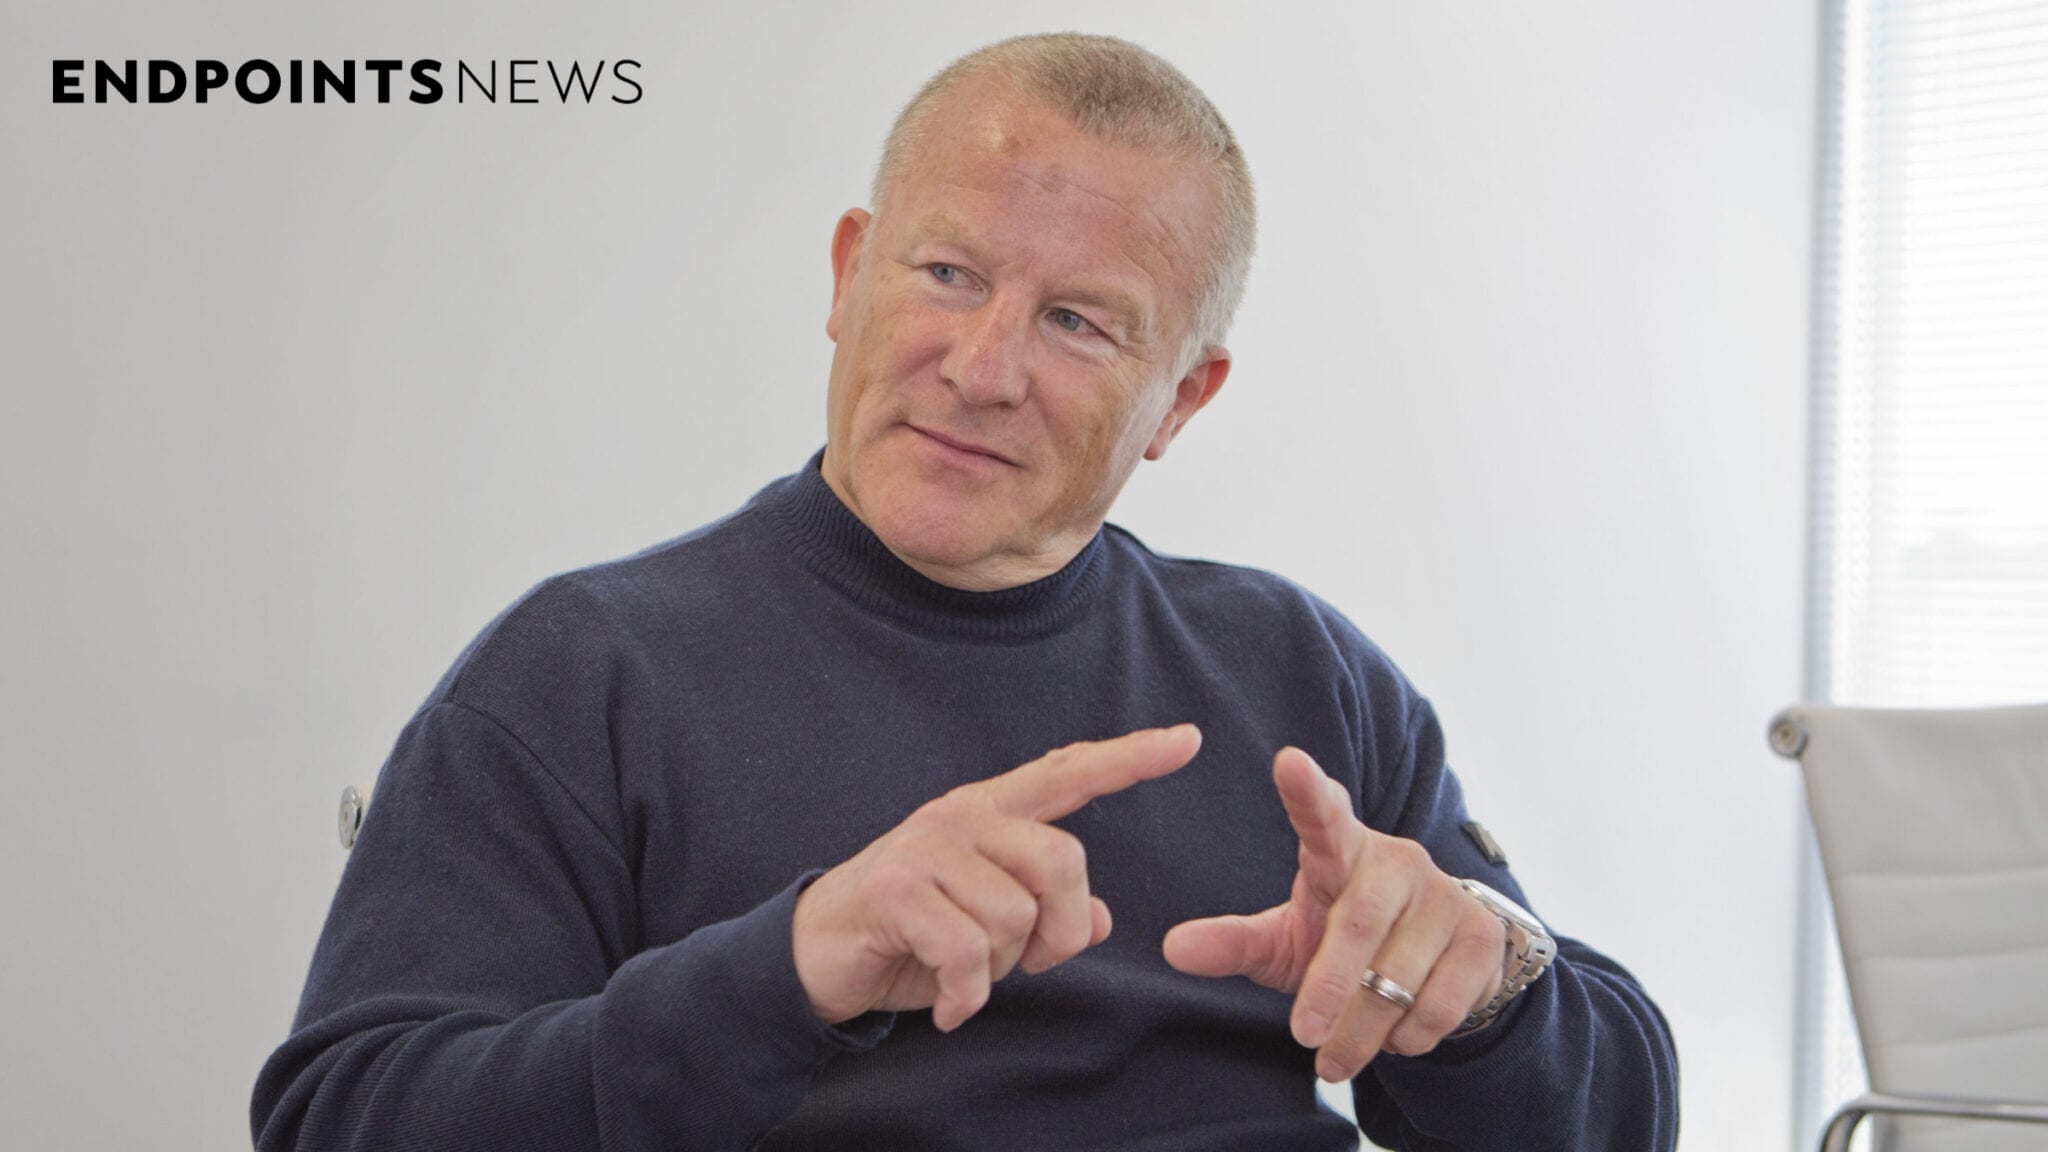 Investors who lost money from Neil Woodford's fund file lawsuit against investment platform